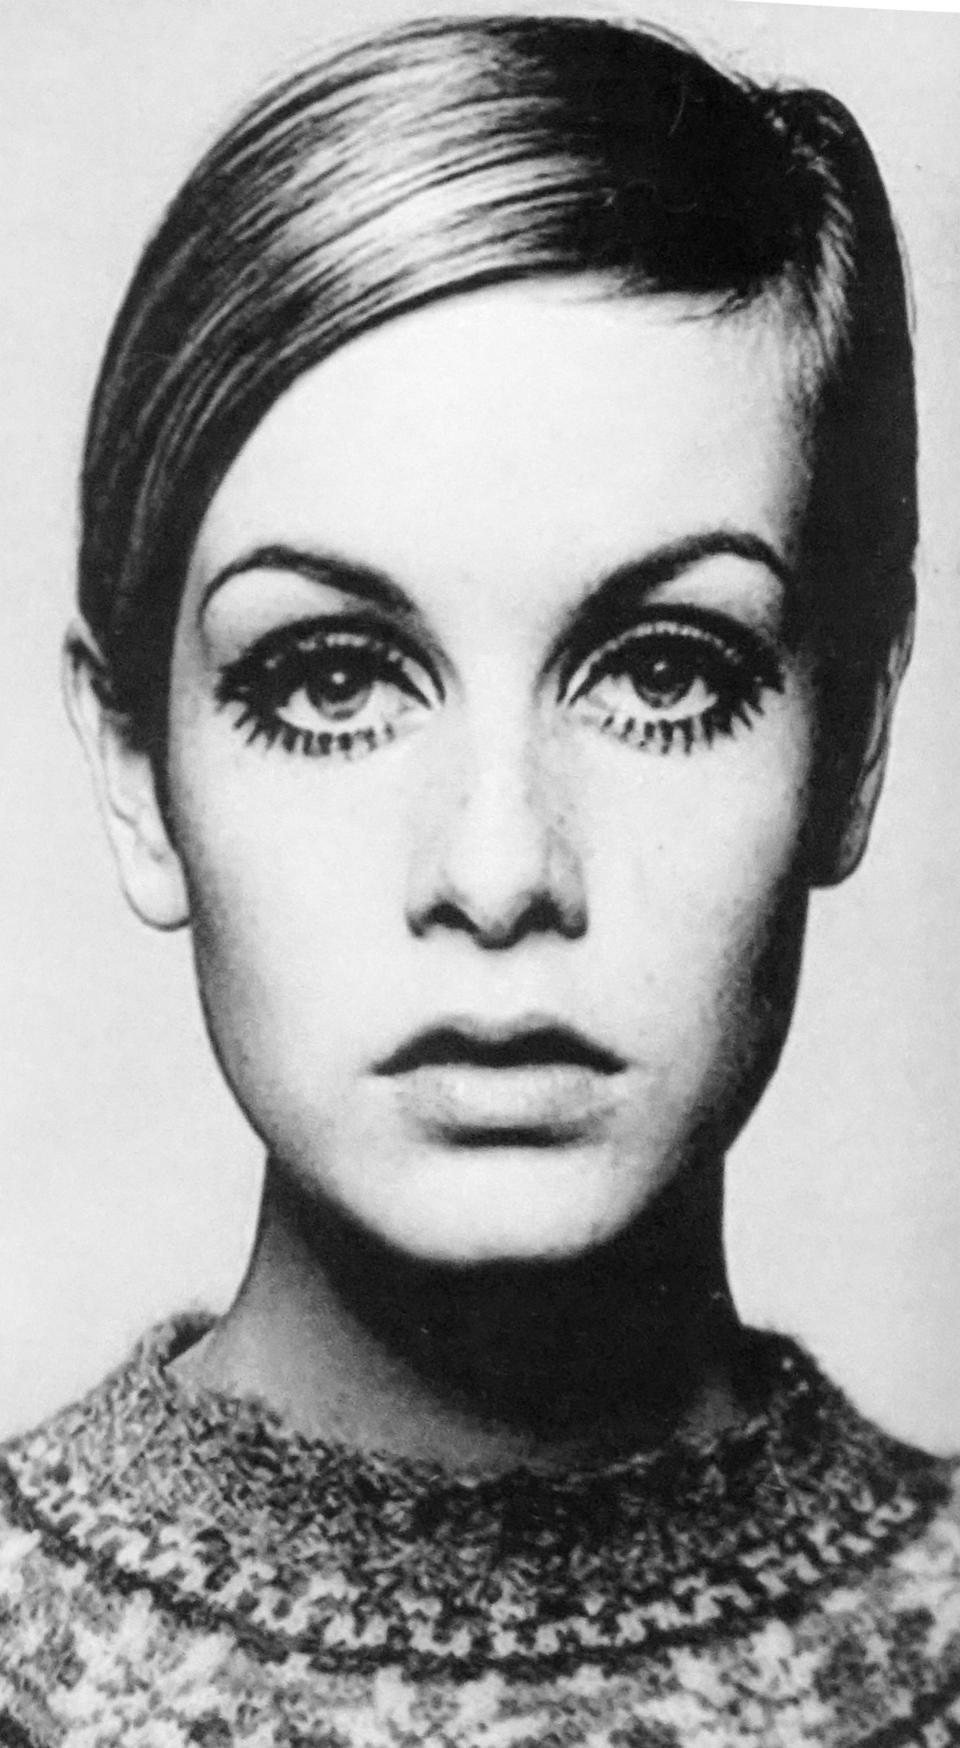 A headshot of Twiggy from the '60s